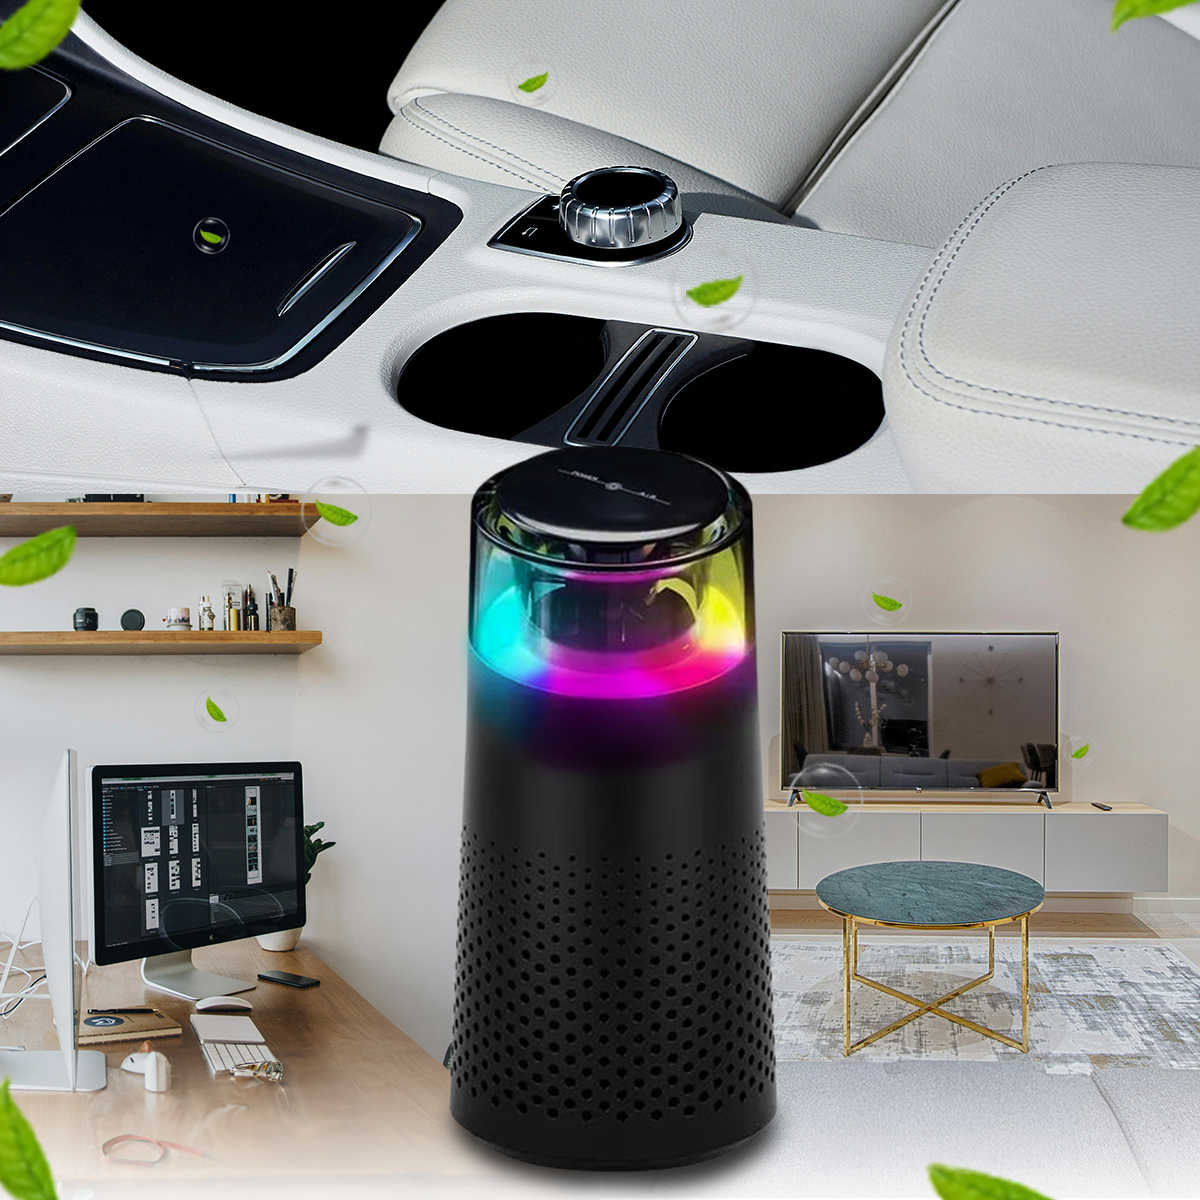 A car cup holder and a smart speaker with colorful lighting.